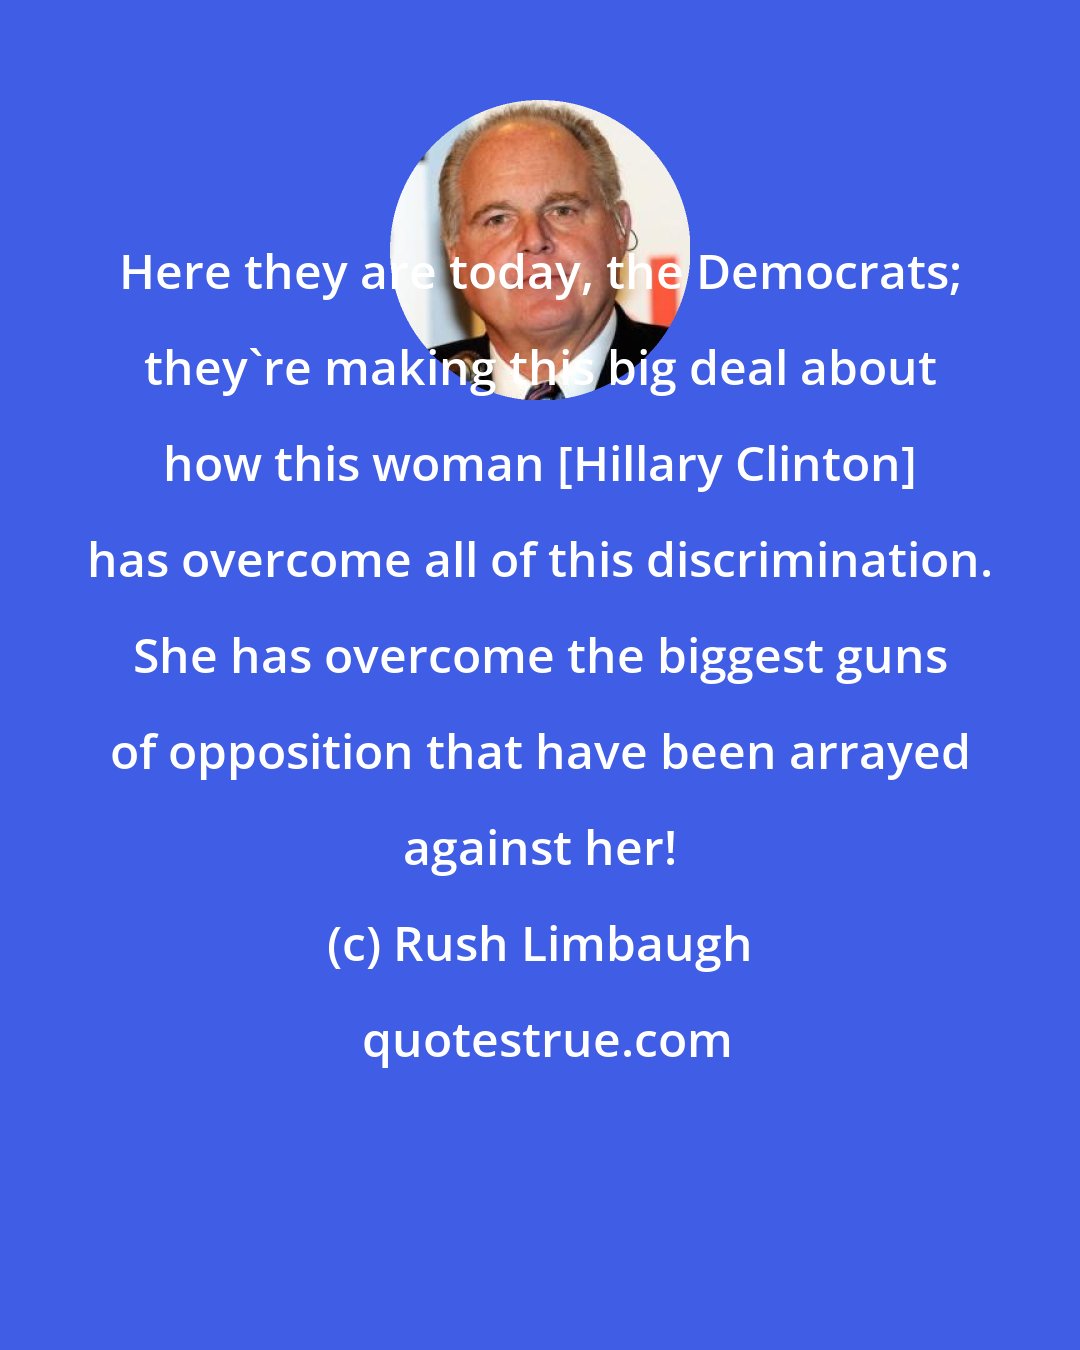 Rush Limbaugh: Here they are today, the Democrats; they're making this big deal about how this woman [Hillary Clinton] has overcome all of this discrimination. She has overcome the biggest guns of opposition that have been arrayed against her!